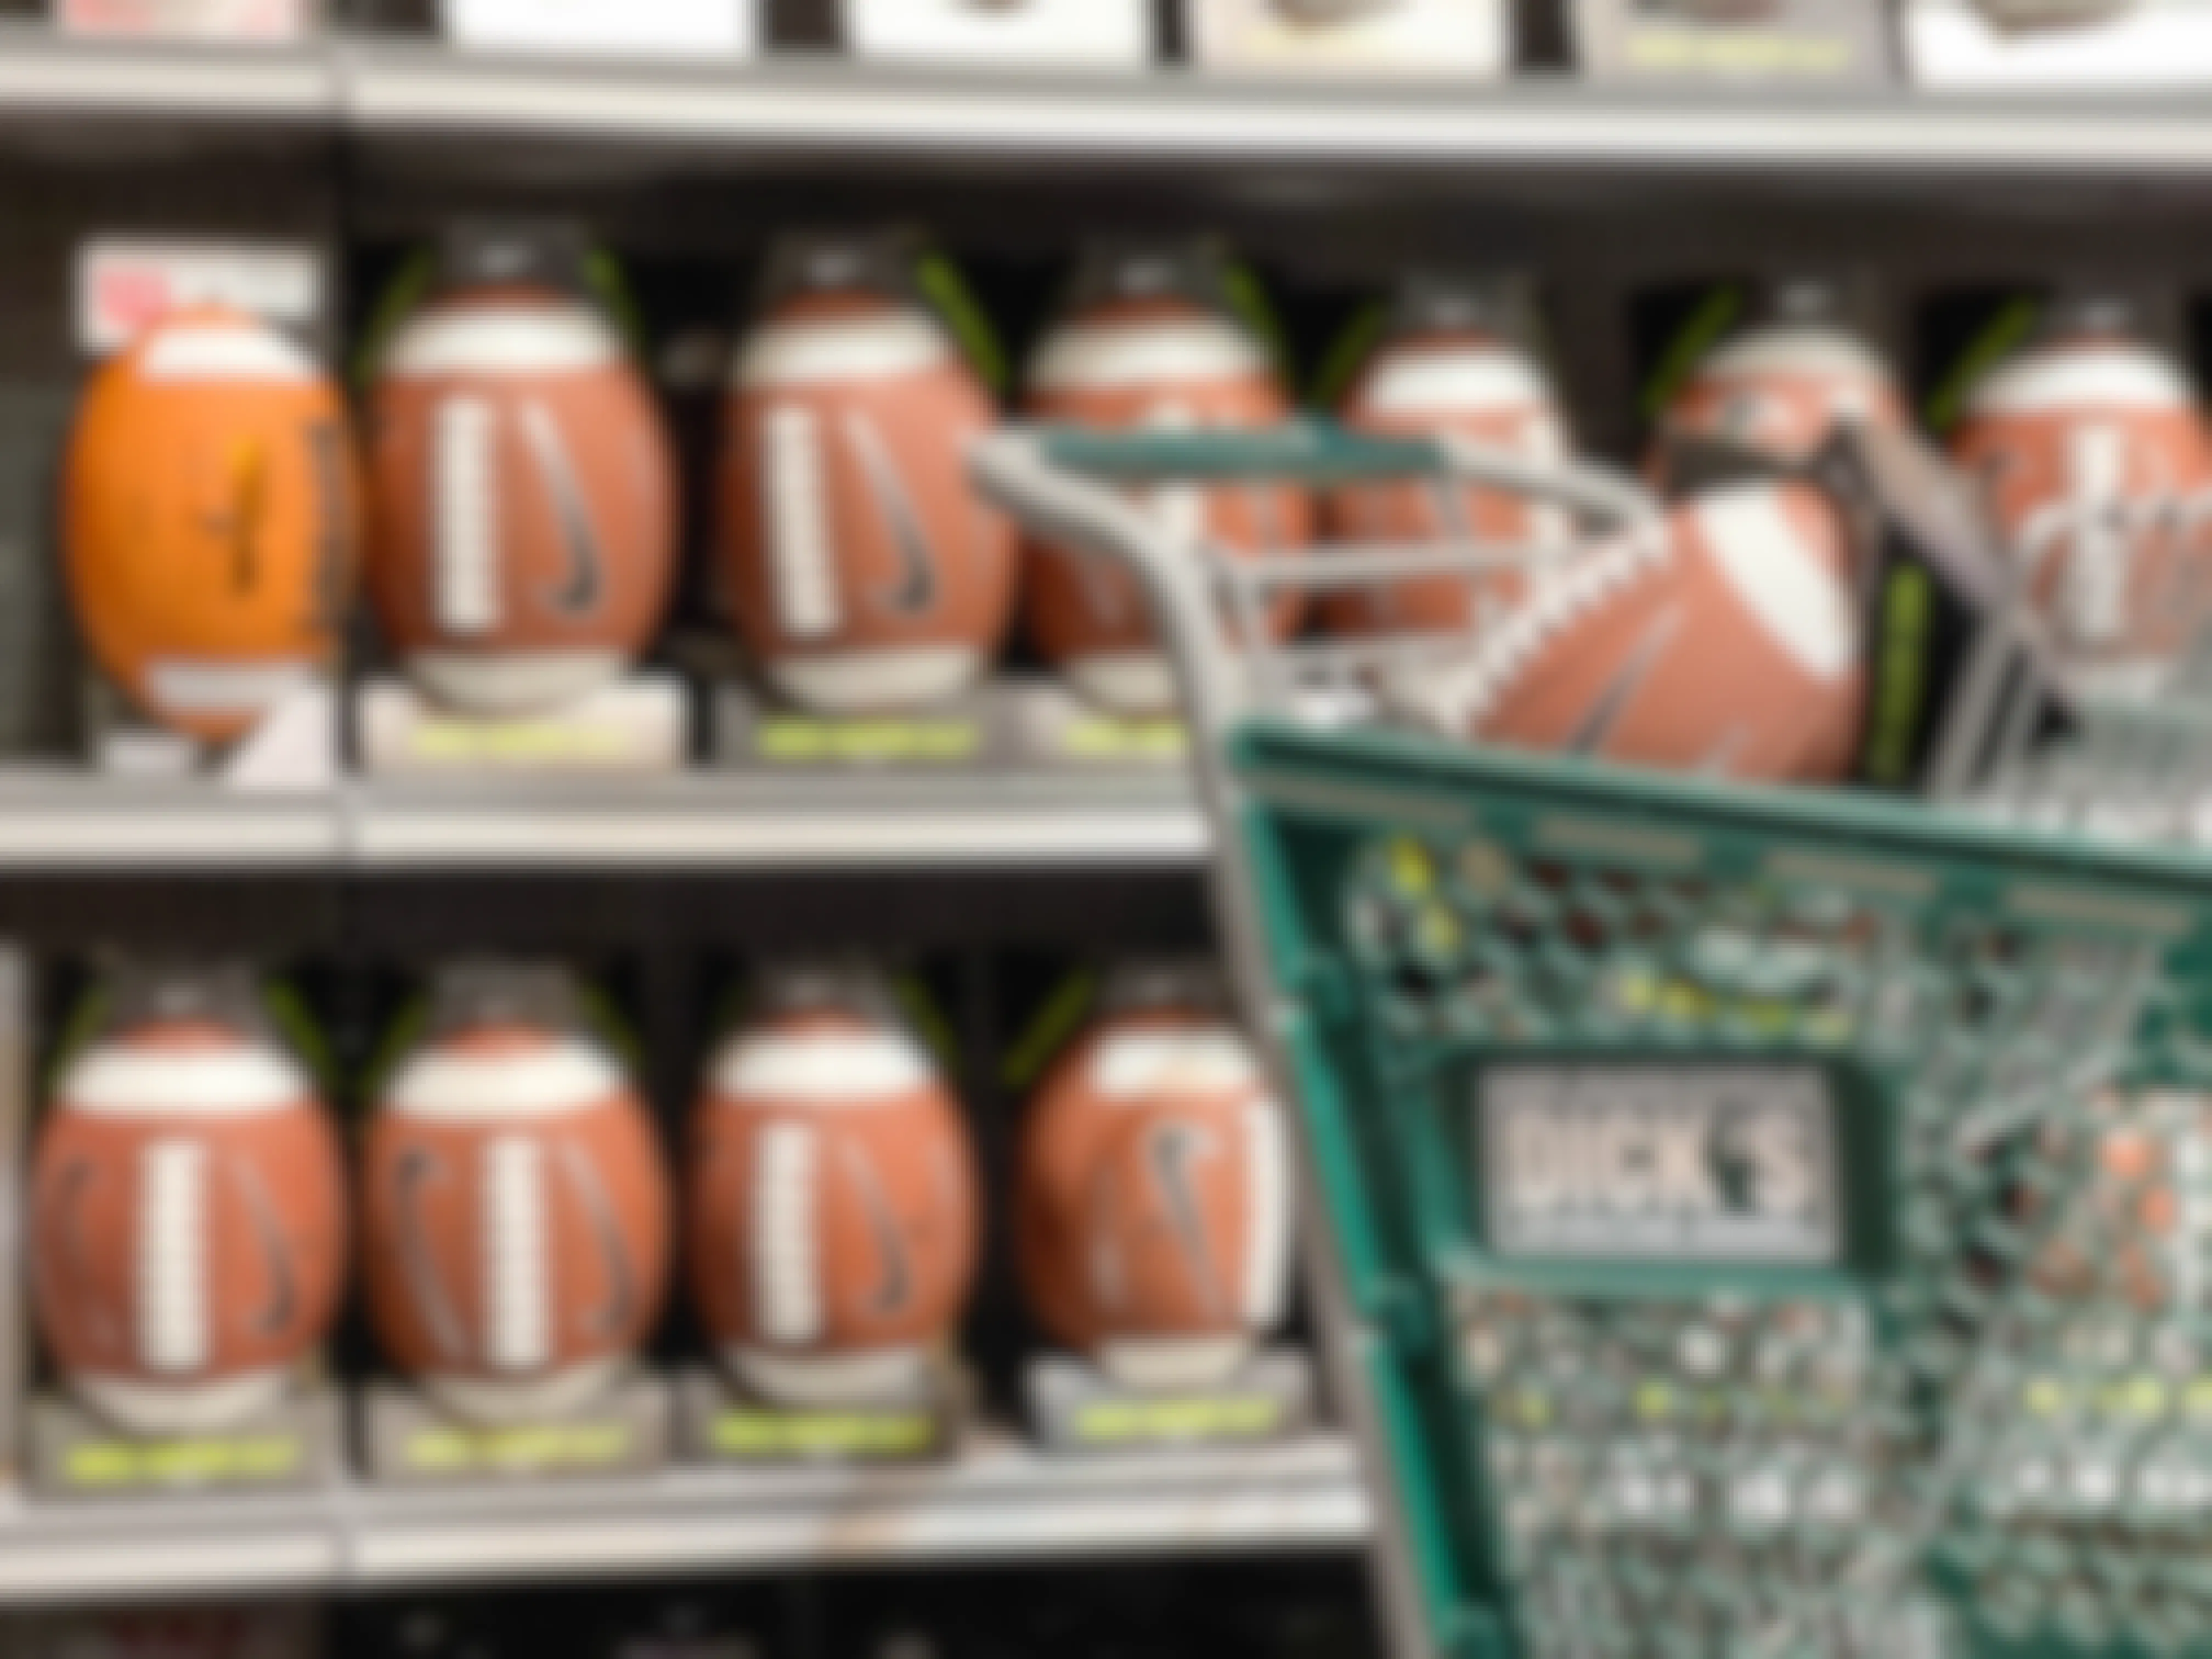 Footballs on a for sale shelf with one in a Dicks sporting goods shopping cart in the forground